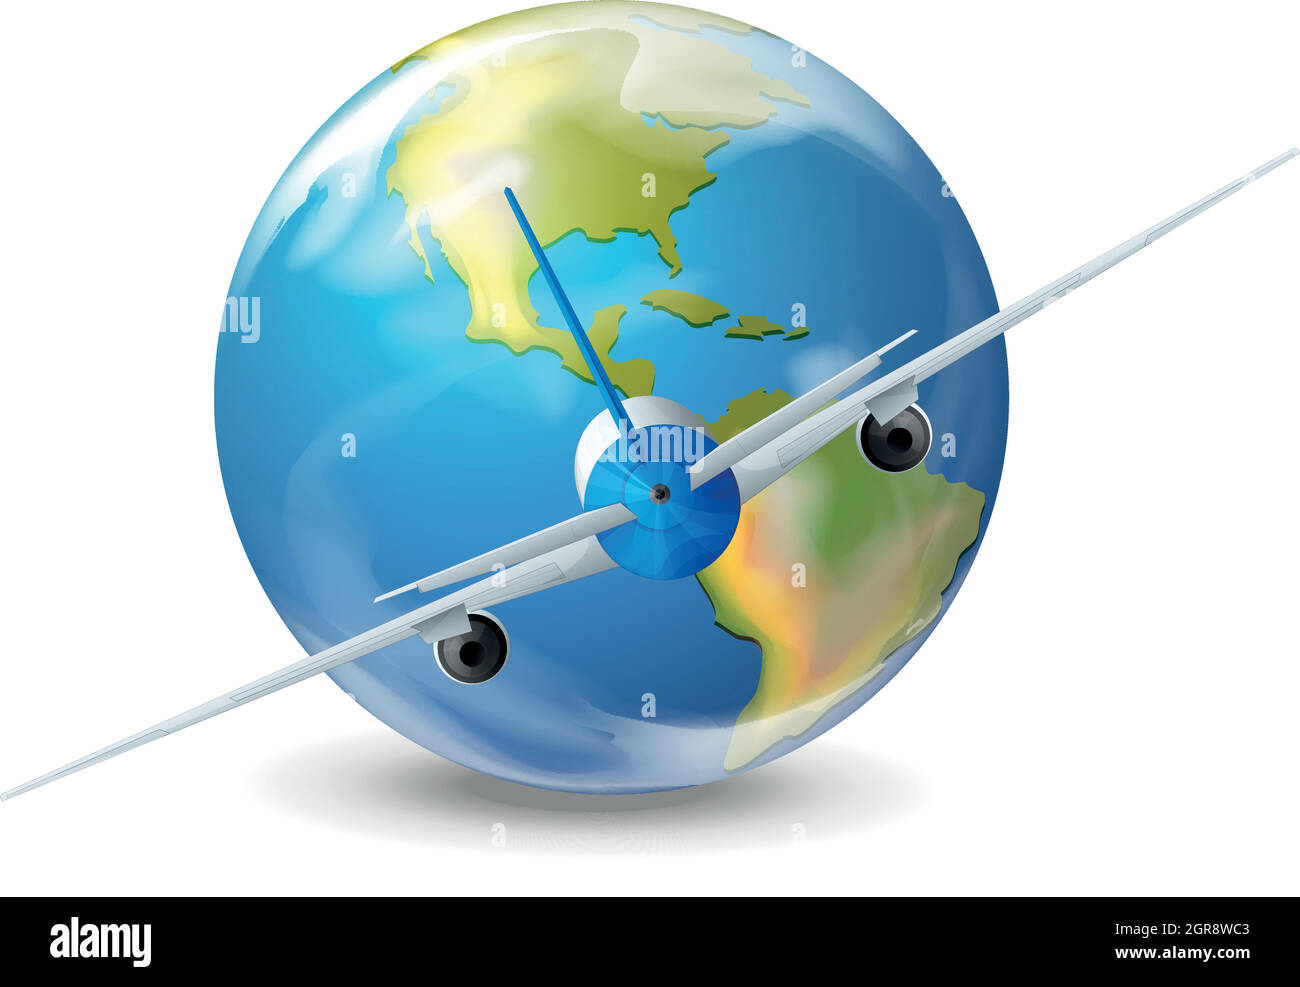 A plane and the planet earth Stock Vector